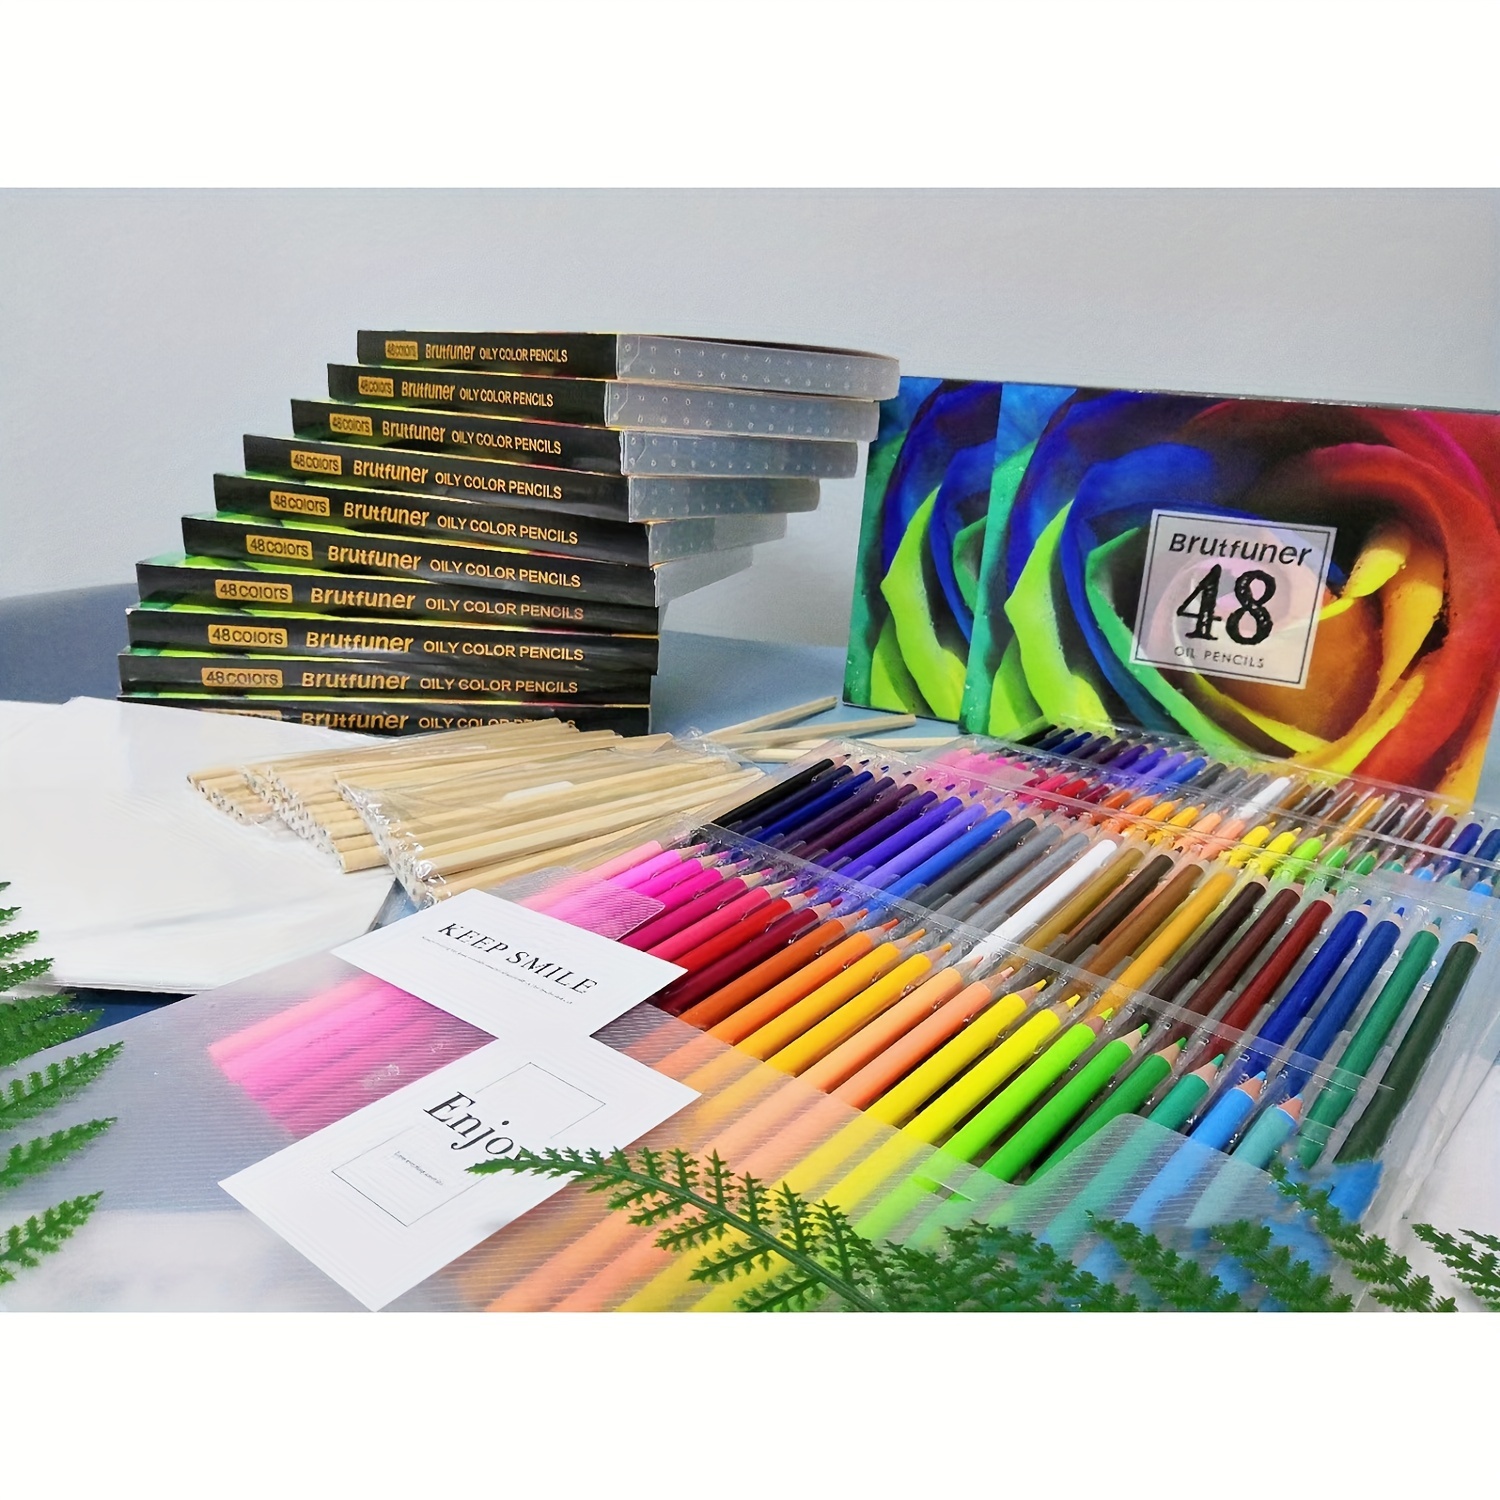 48 Colored Pencils, Color Pencils for Adult Coloring Book, Artist